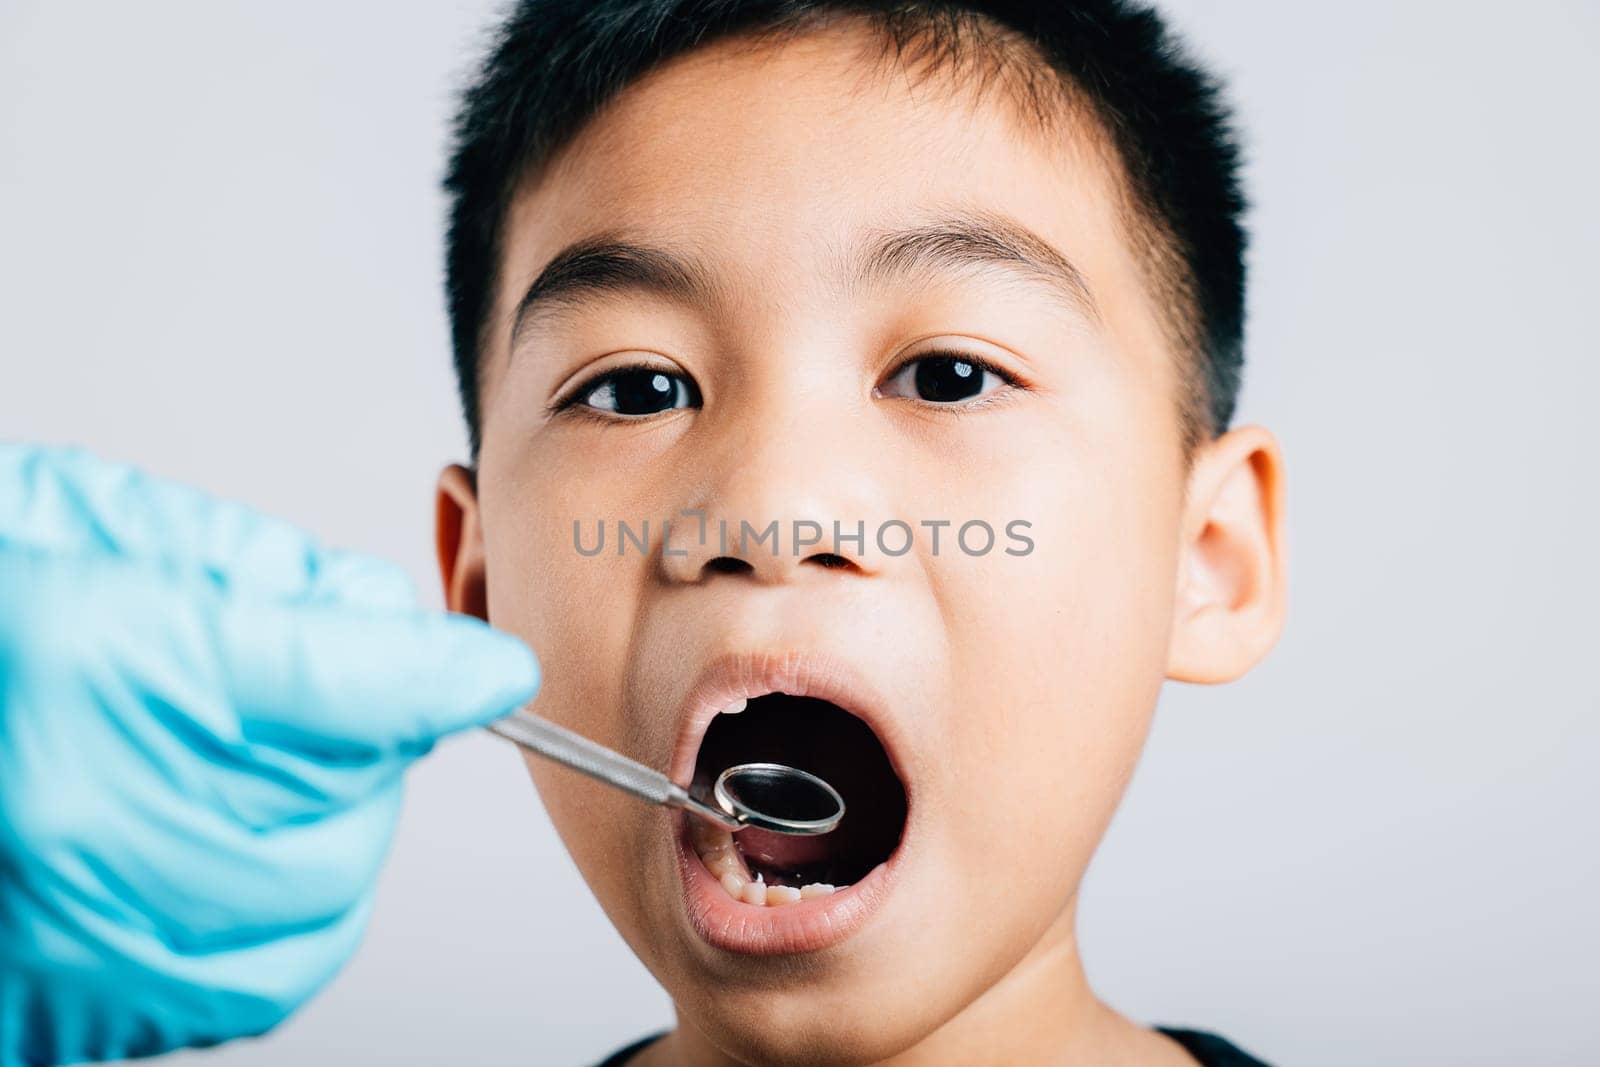 A pediatric dentist examines a child's mouth after extracting a loose milk tooth. Dental tools aid in examination process in a dental office setting. Doctor uses mouth mirror to checking teeth cavity